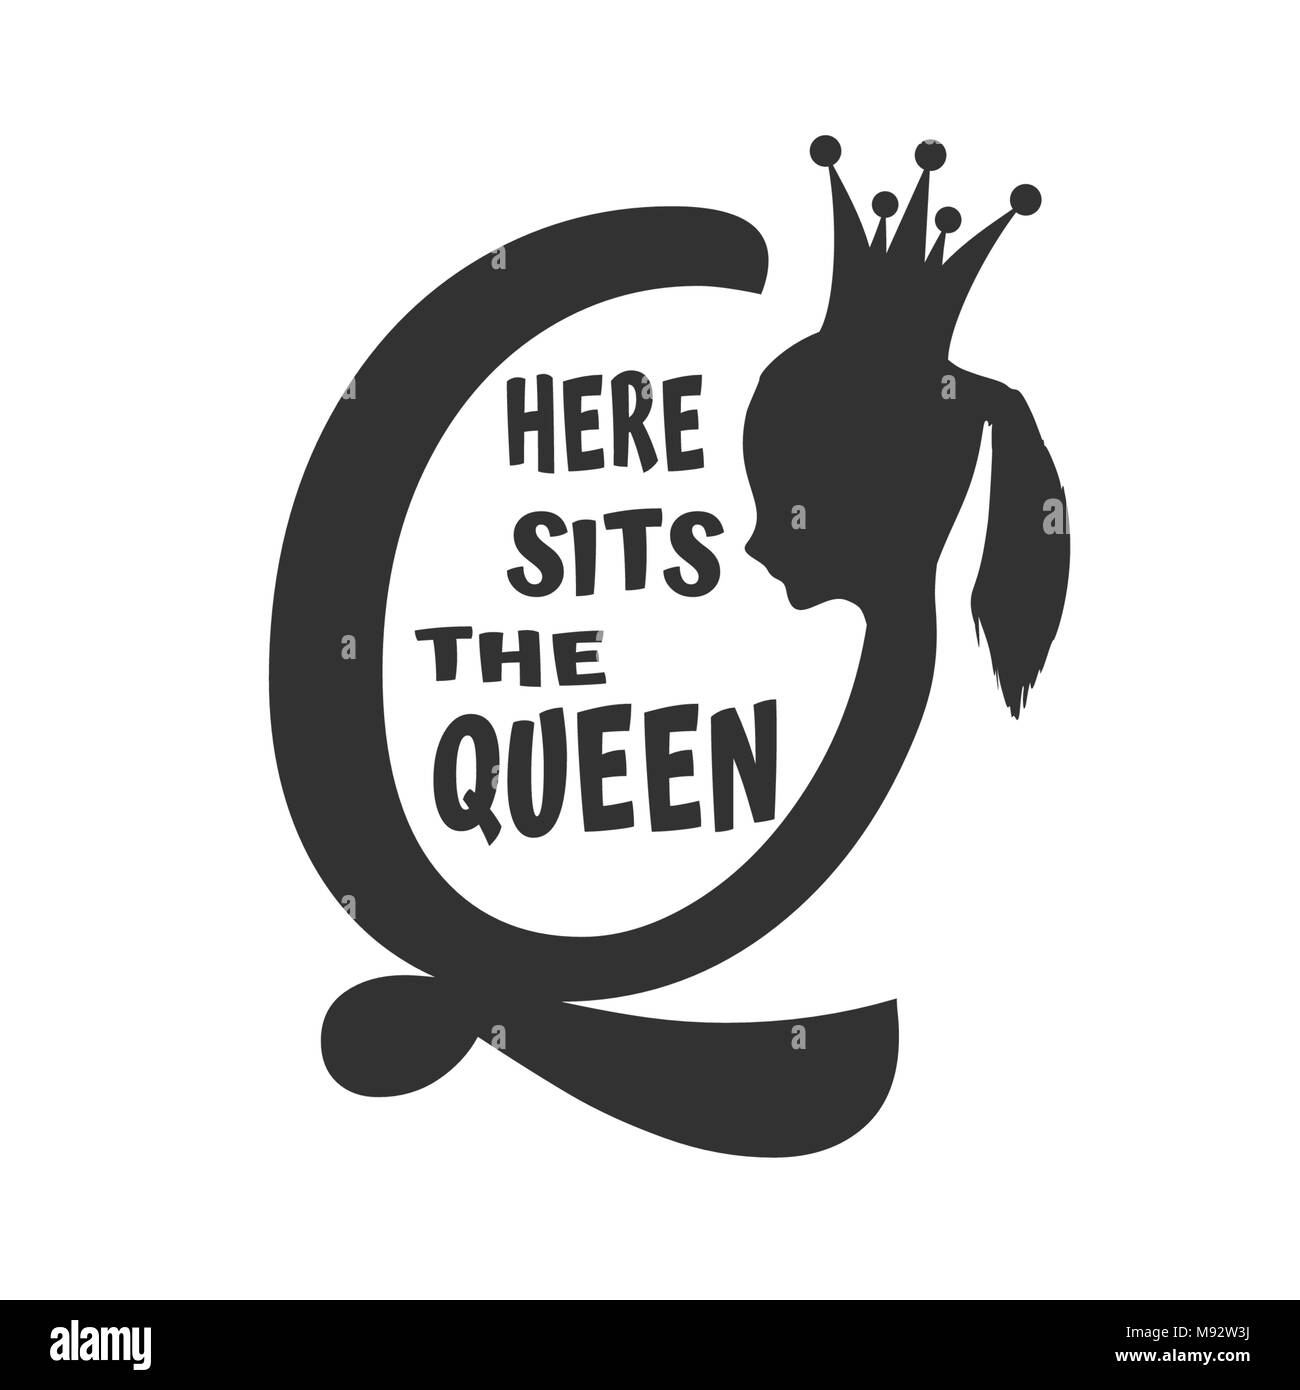 - & silhouette. queen Image quote Alamy Motivation Art Stock Vintage Vector